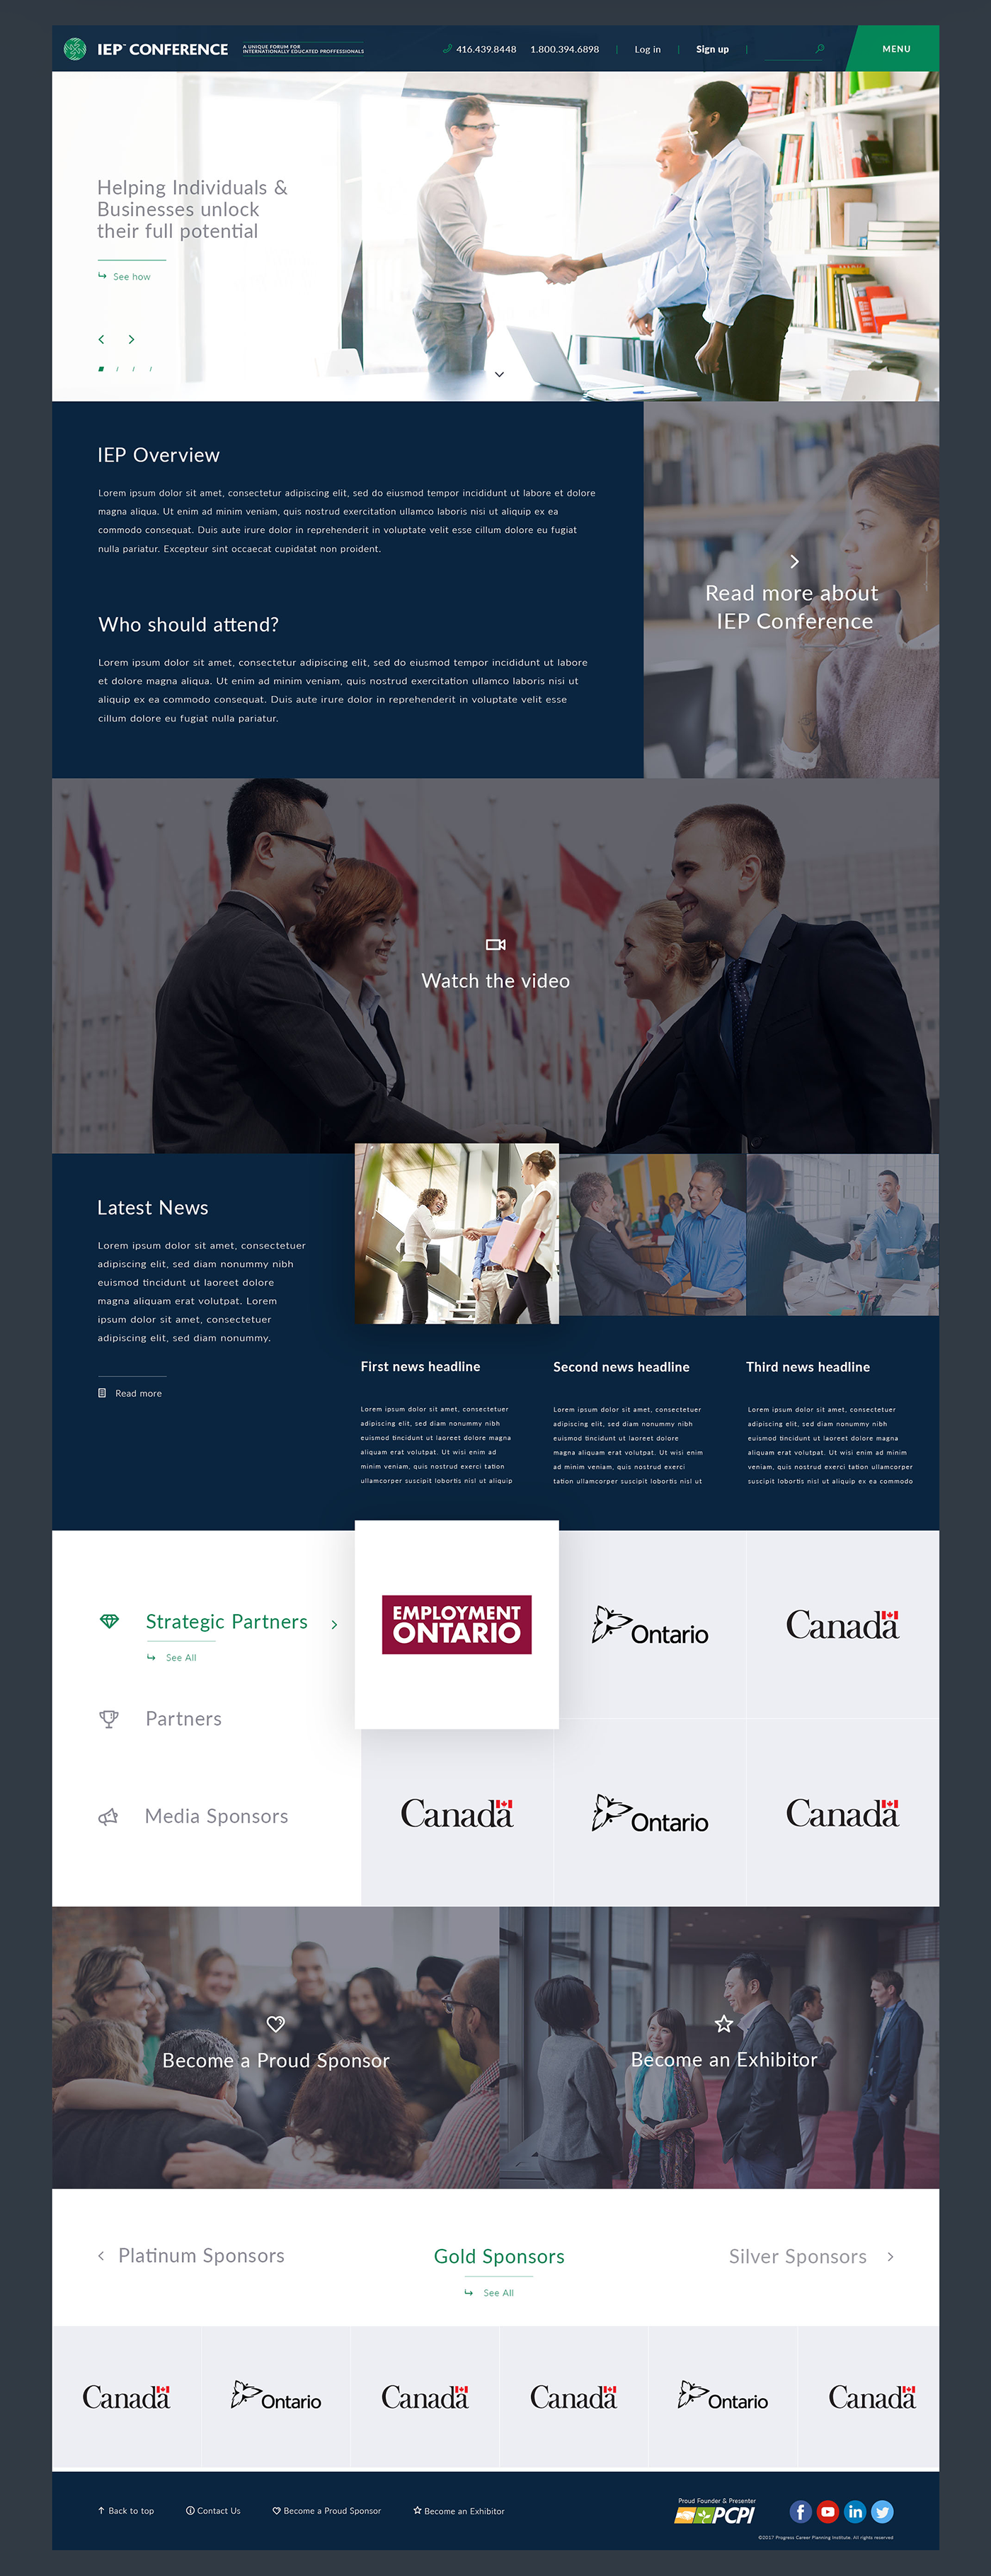 IEP iep conference Web Design  ux UI user experience Toronto Canada conference Website